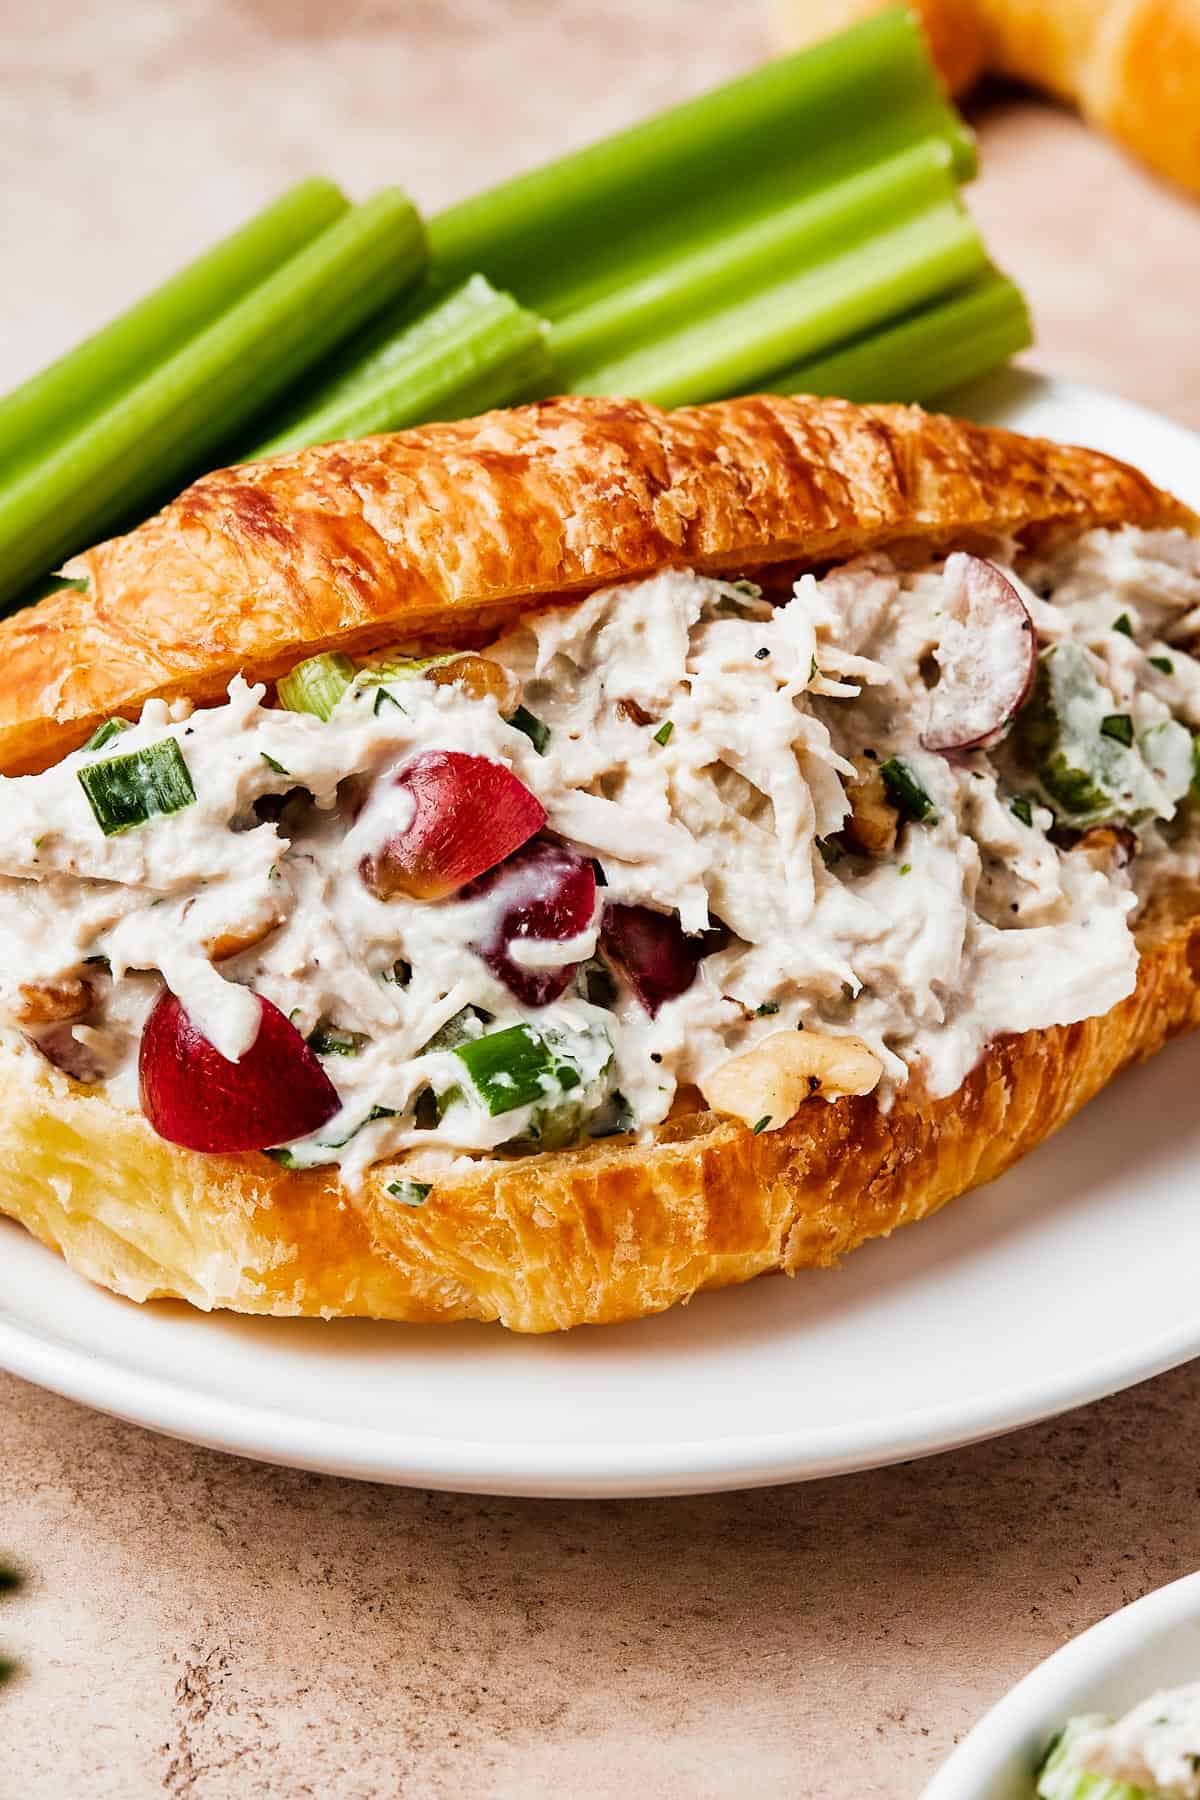 Chicken Salad with Grapes served in croissant bun.